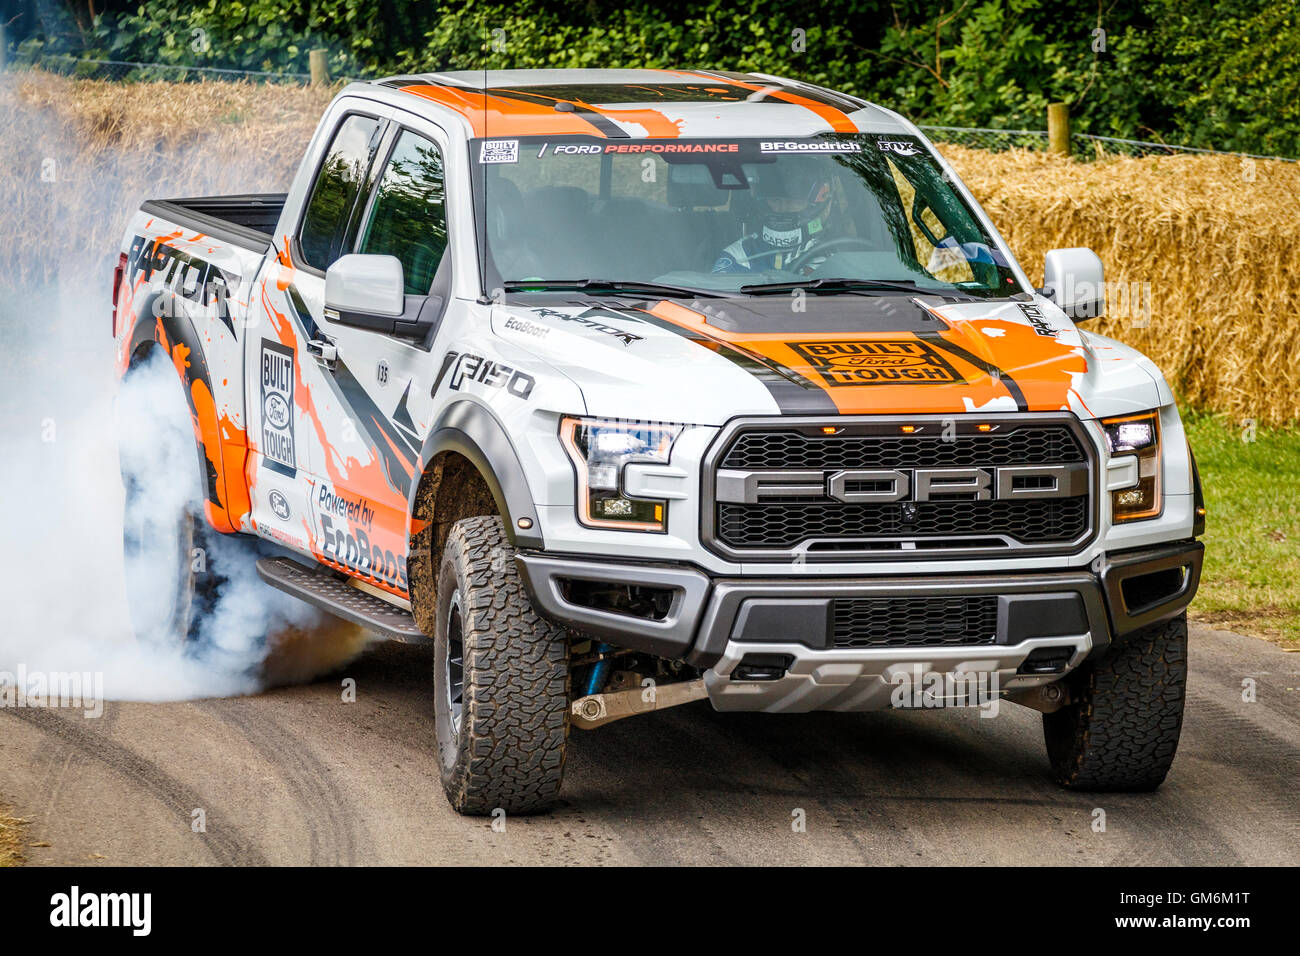 2016 Ford F-150 Raptor desert truck racer with driver Ben Collins at the  2016 Goodwood Festival of Speed, Sussex, UK Stock Photo - Alamy